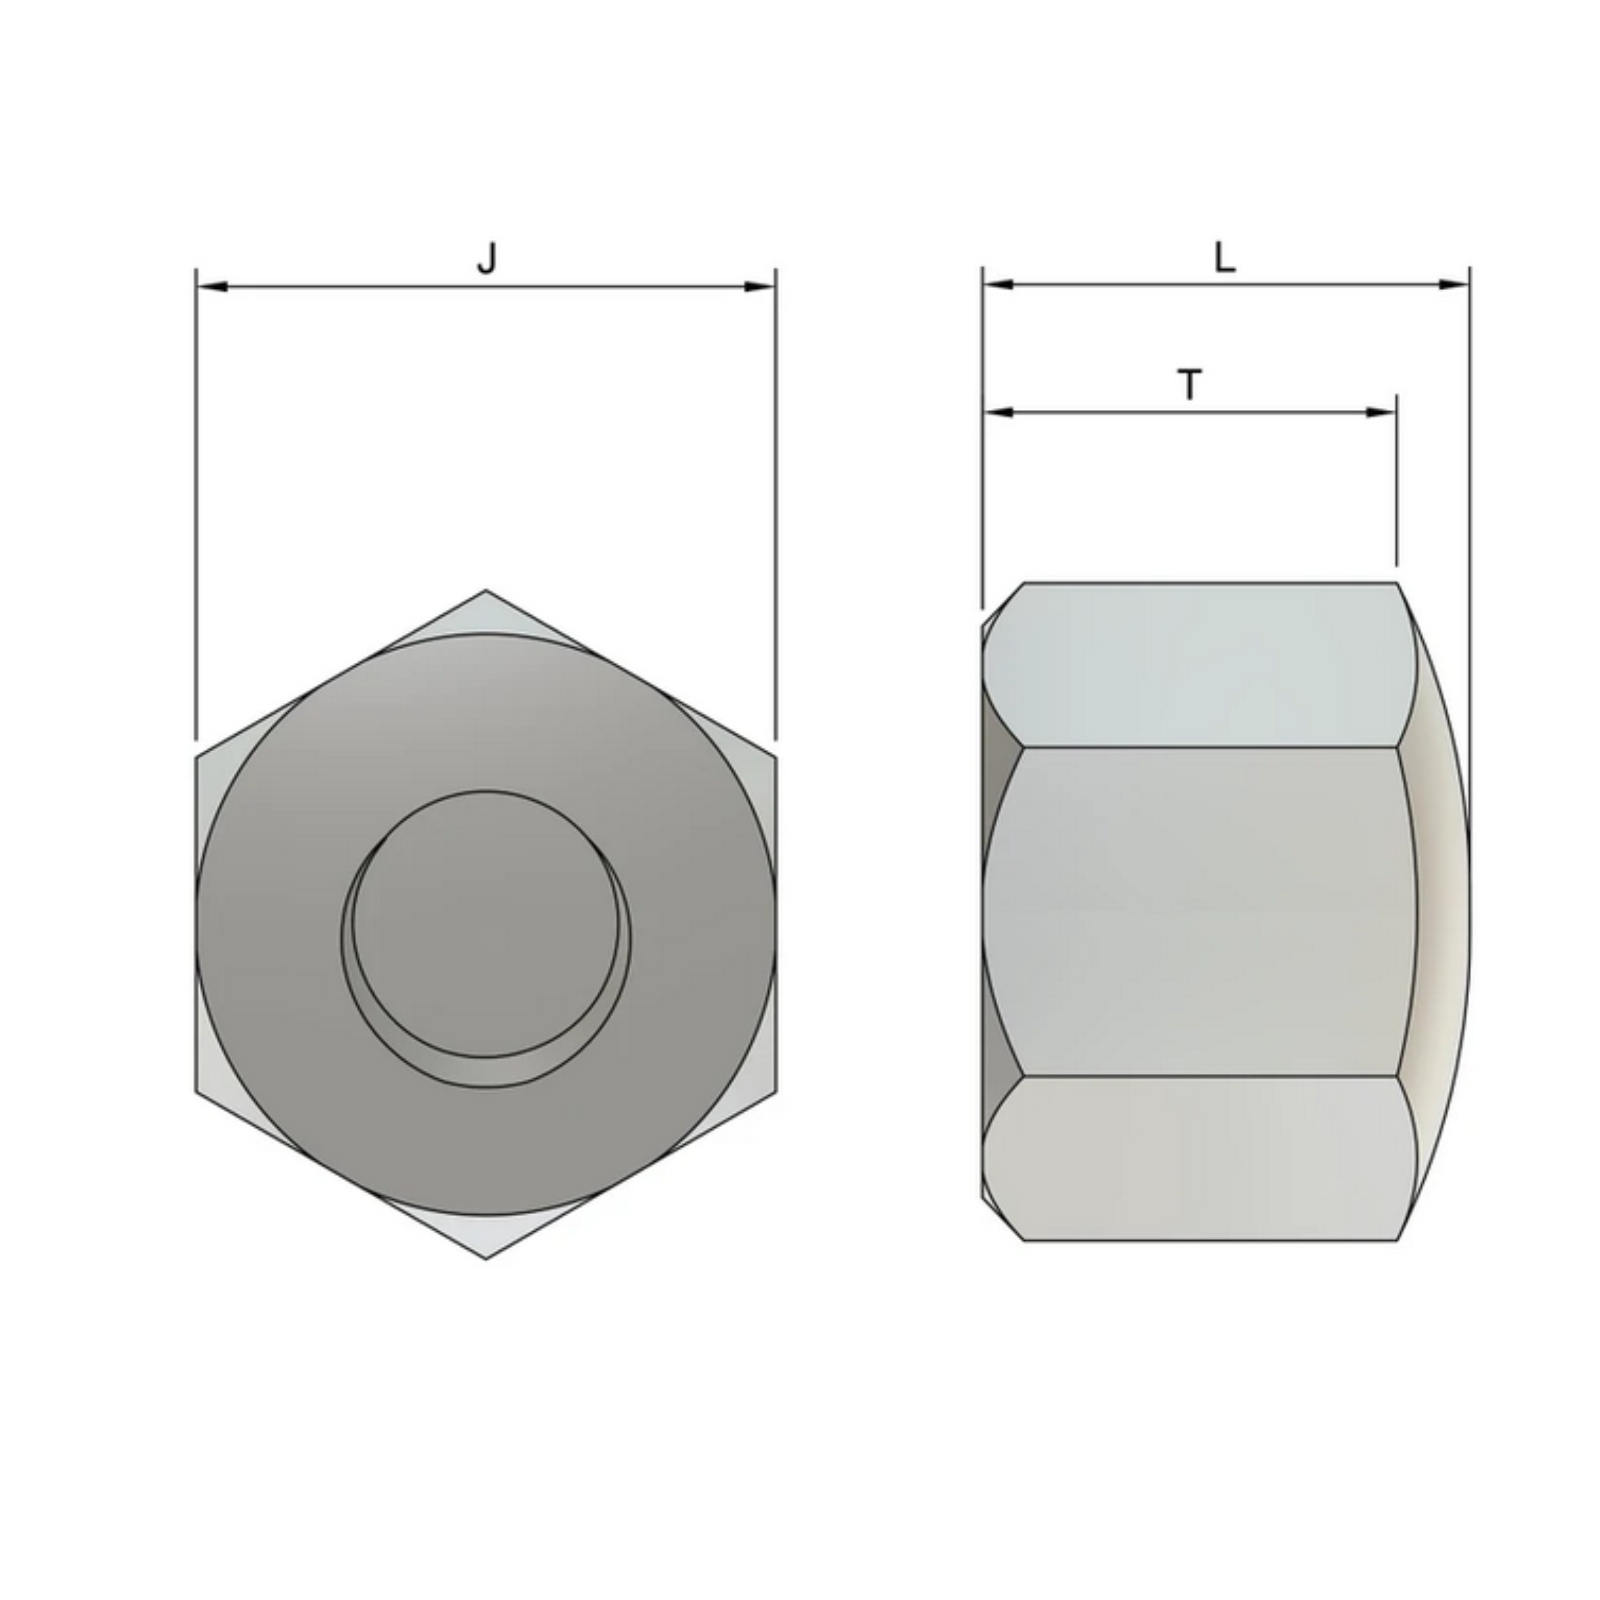 M10 Cap Nuts (DIN 917) - Stainless Steel (A2)